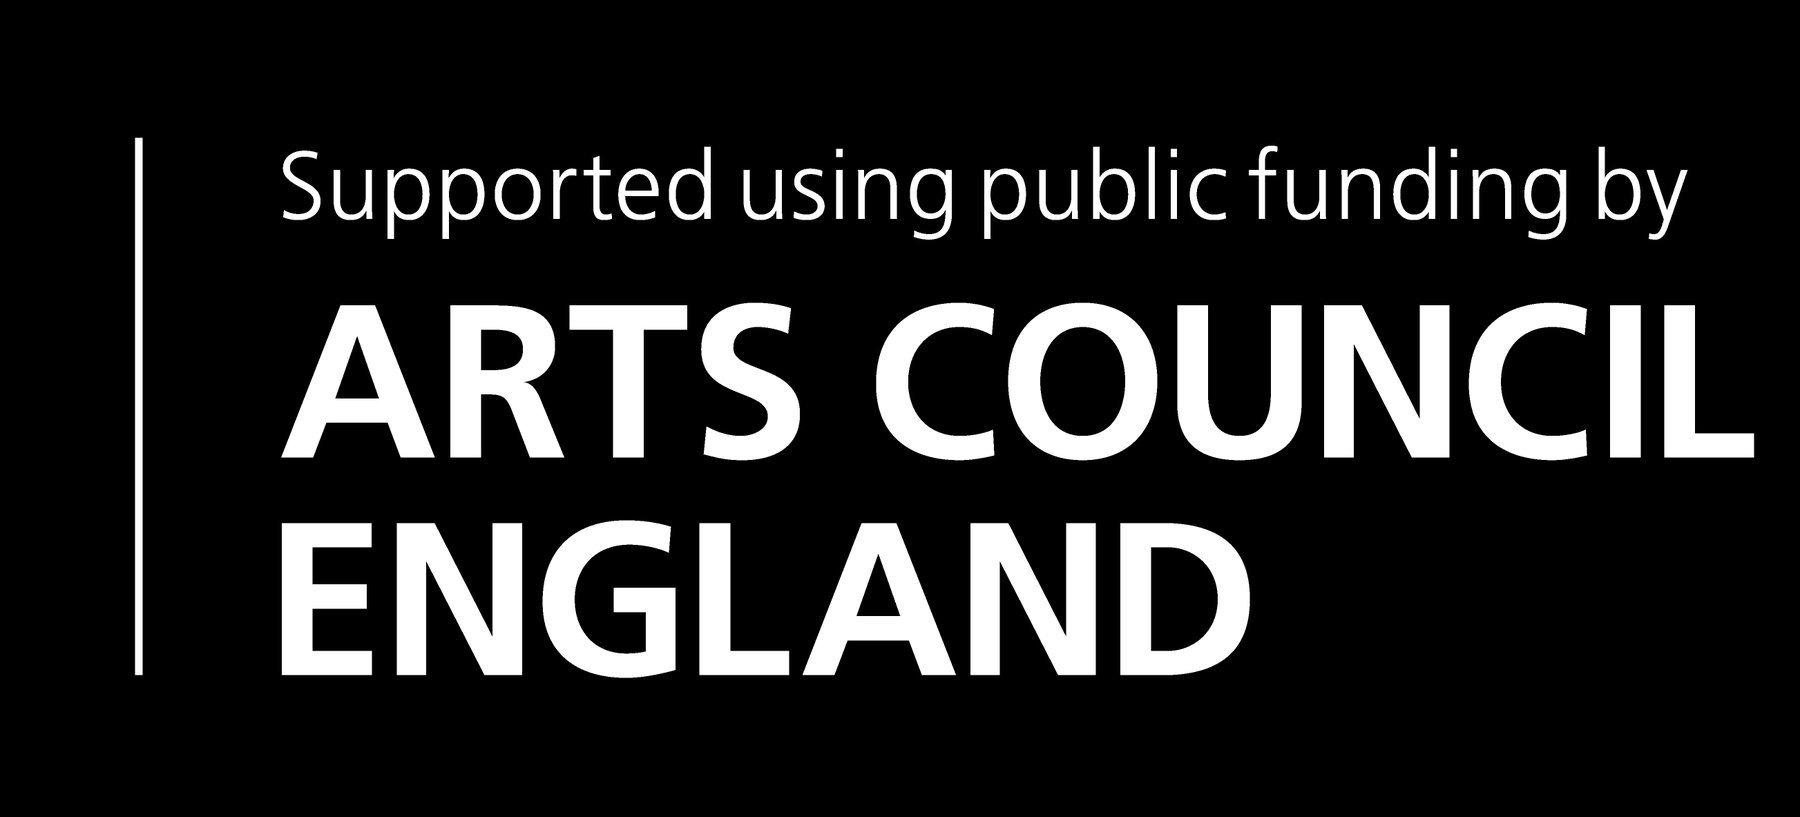 Arts Council England and NPO Funding